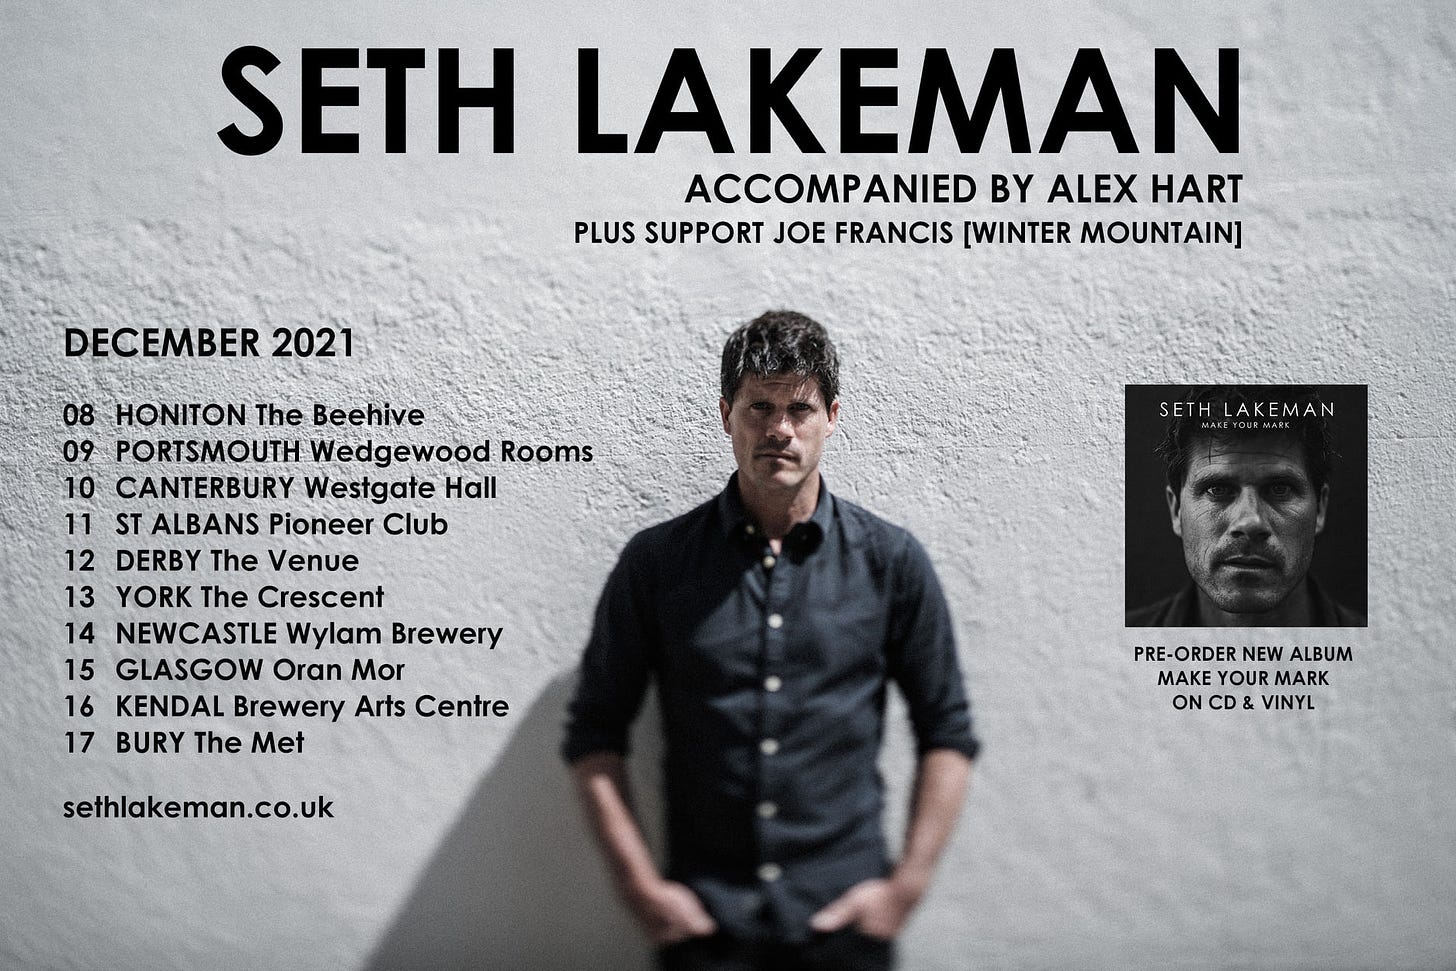 May be an image of one or more people and text that says "SETH LAKEMAN ACCOMPANIED BY ALEX HART PLUS SUPPORT JOE FRANCIS [WINTER MOUNTAIN] DECEMBER 2021 08 HONITON The Beehive 09 PORTSMOUTH Wedgewood Rooms 10 CANTERBURY Westgate Hall 11 ST ALBANS Pioneer Club 12 DERBY The Venue 13 YORK The Crescent 14 NEWCASTLE Wylam Brewery 15 GLASGOW Oran Mor 16 KENDAL Brewery Arts Centre 17 BURY The Met SETHLAKEMAN sethlakeman.co.uk PRE-ORDER P NEW ALBUM MAKE YOUR MARK ON CD& VINYL"